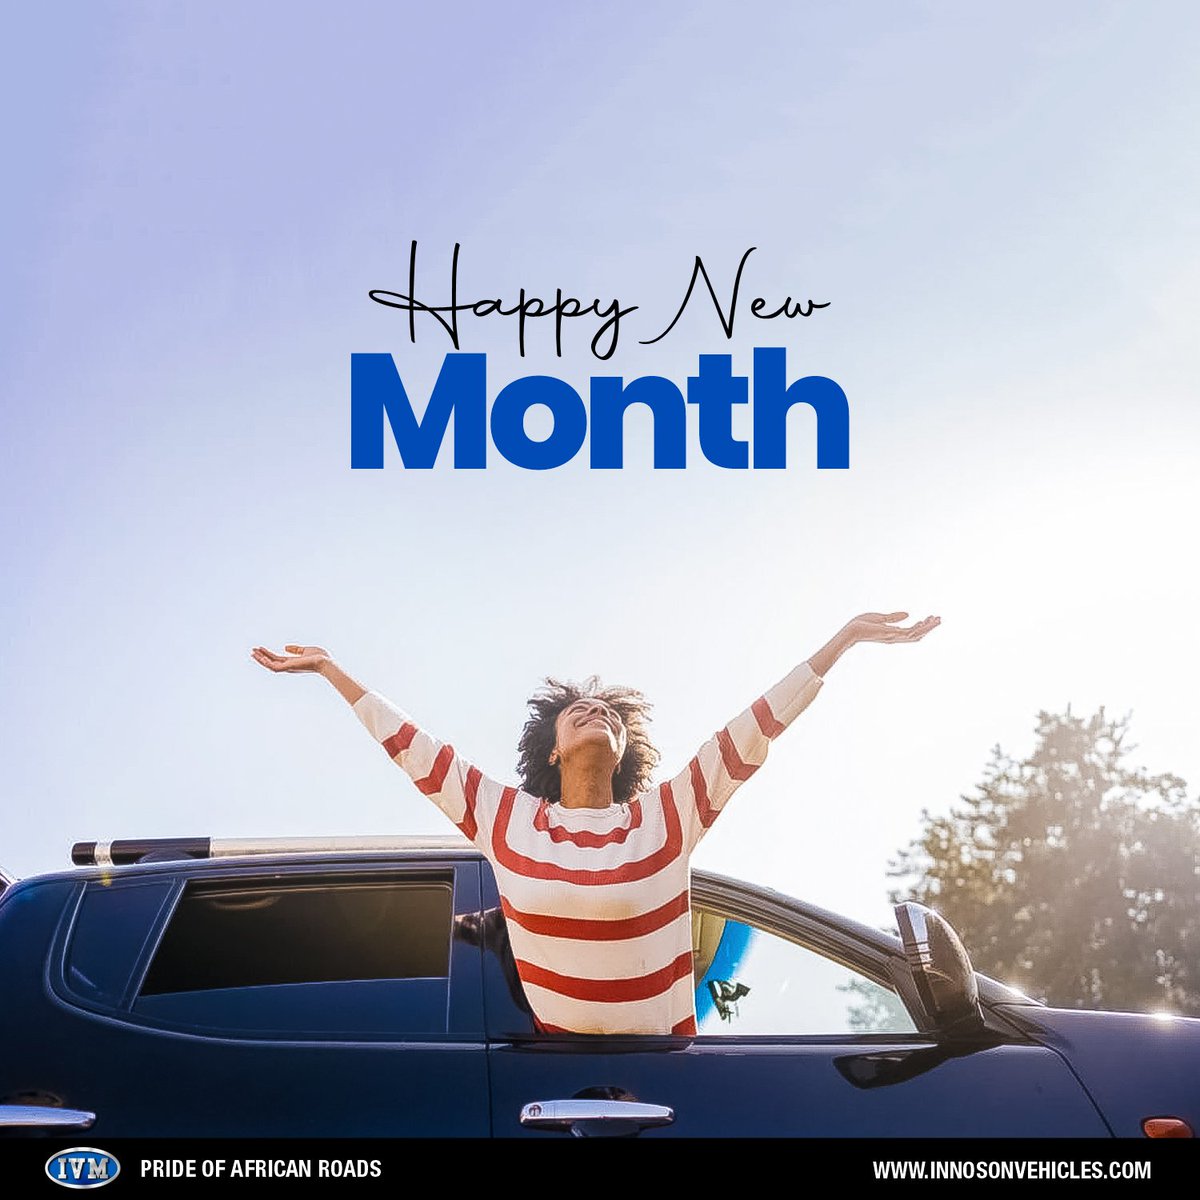 Happy New Month! Marching into greatness with IVM. Are you ready for the ride?